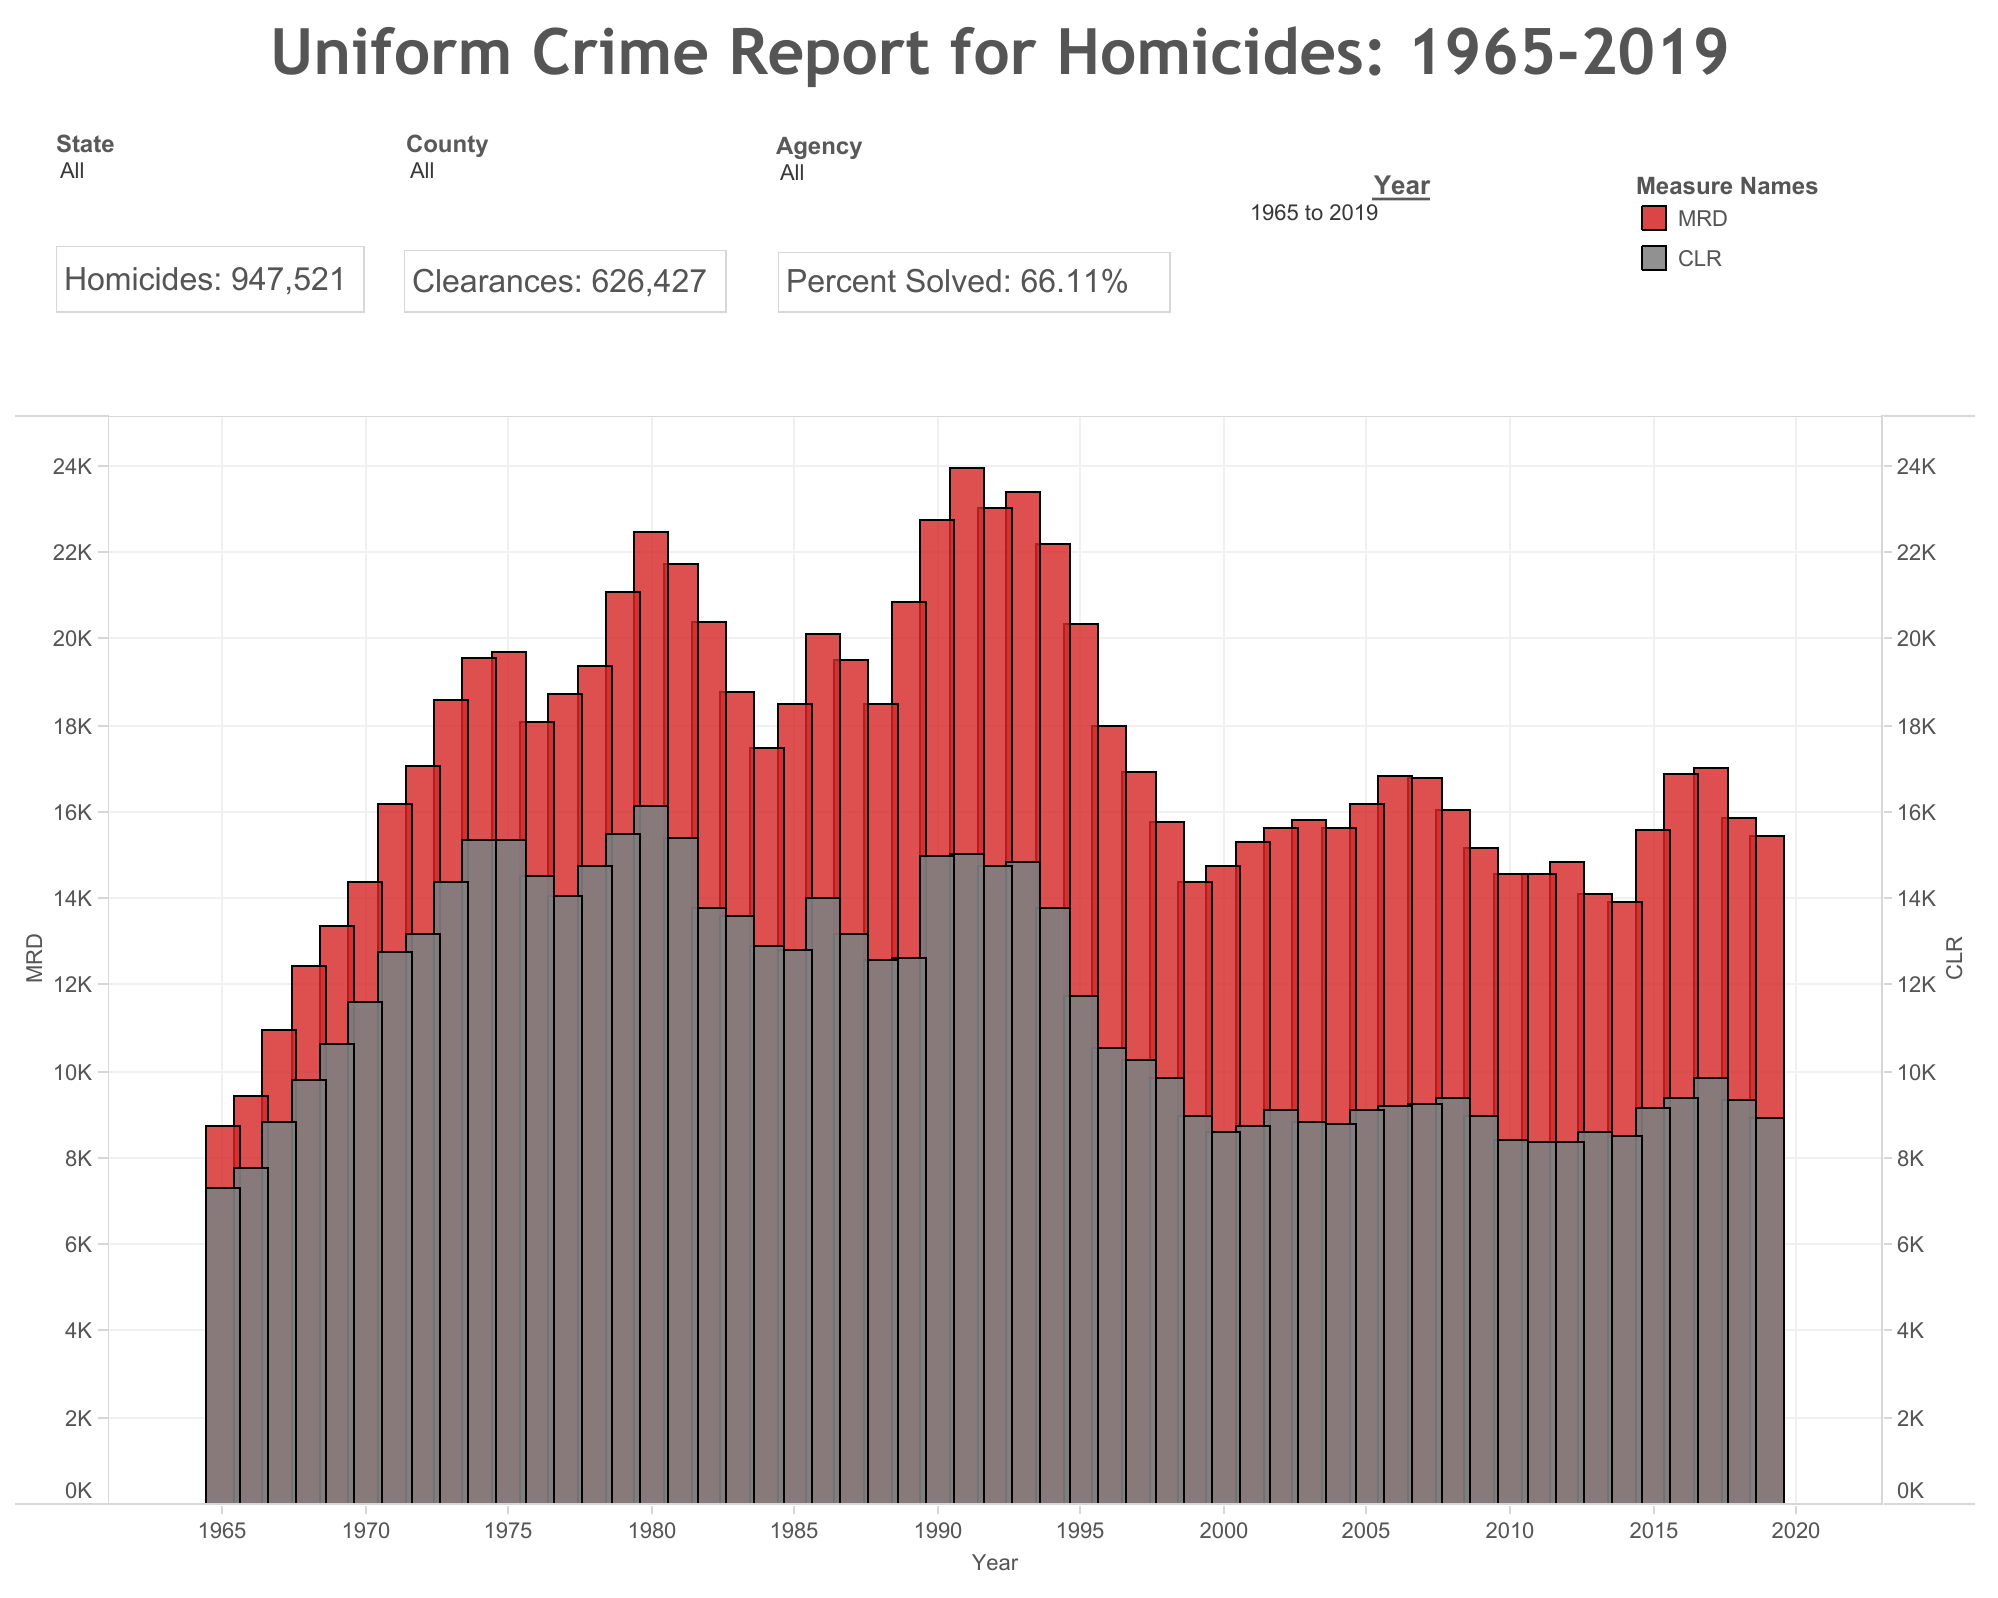 Chart: Getting Away With Murder